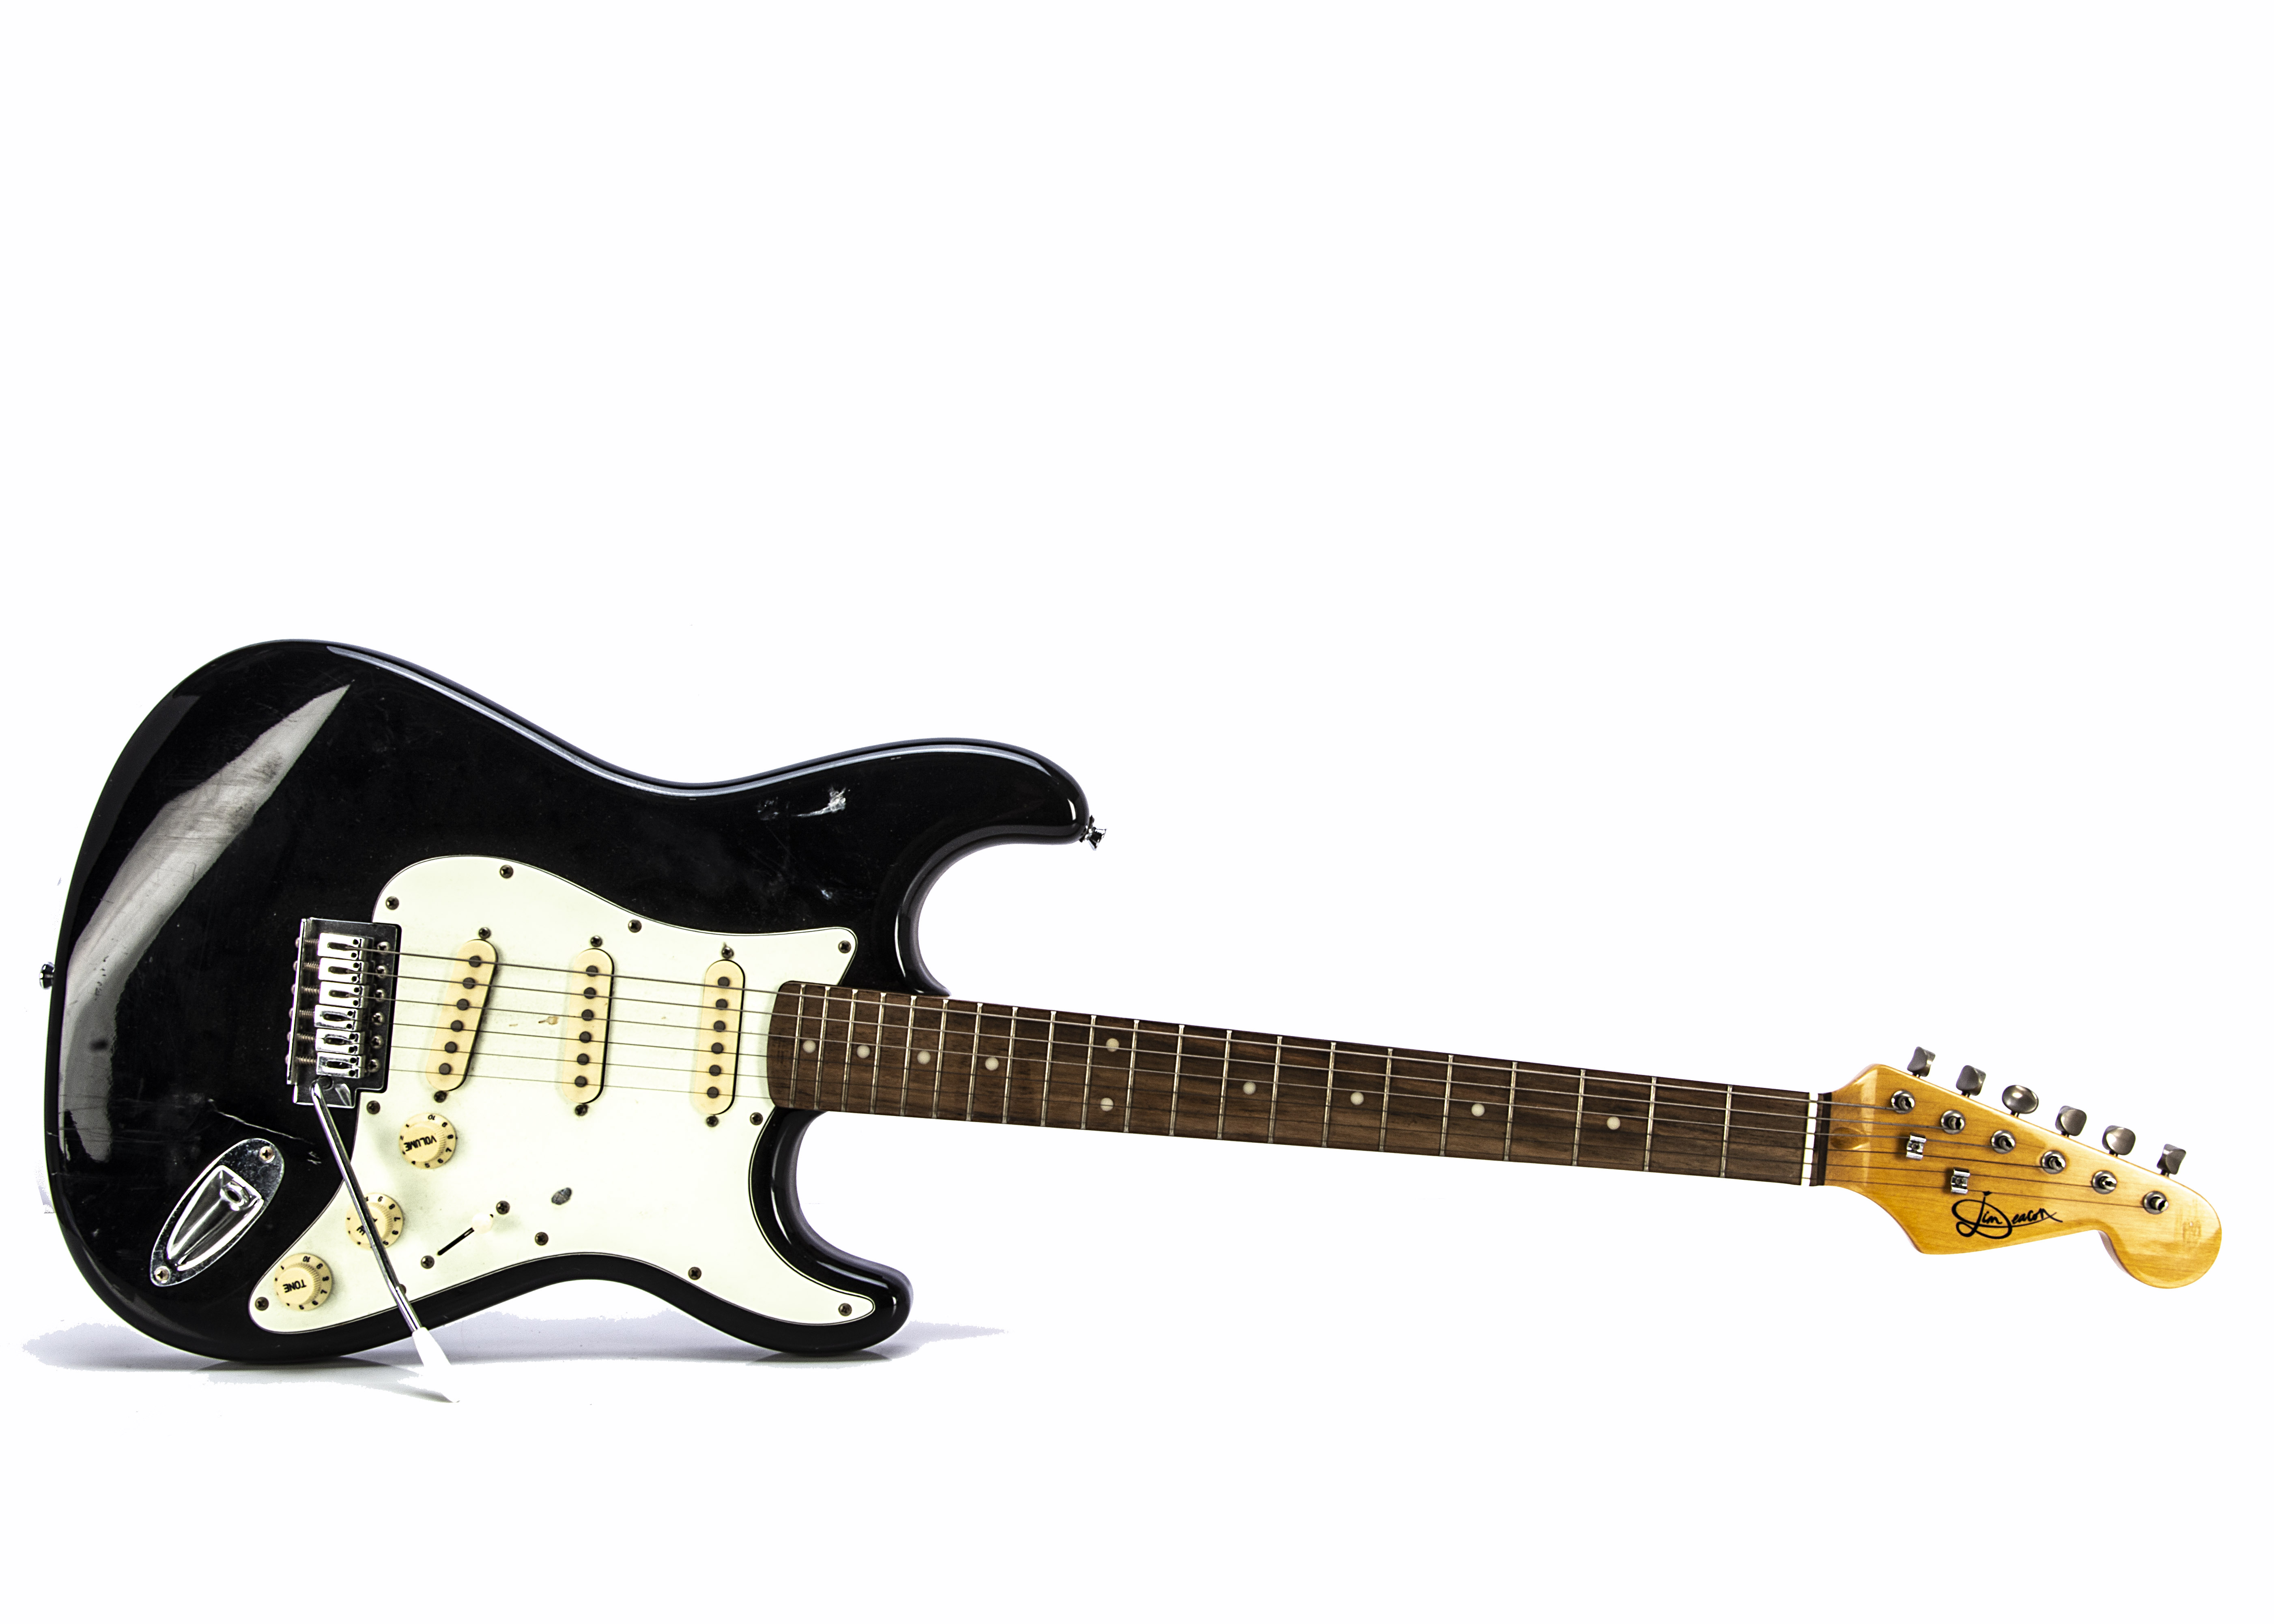 Three Electric Guitars, three Stratocaster style electric guitars, a Marlin Slammer s/n 734056, a - Image 5 of 6